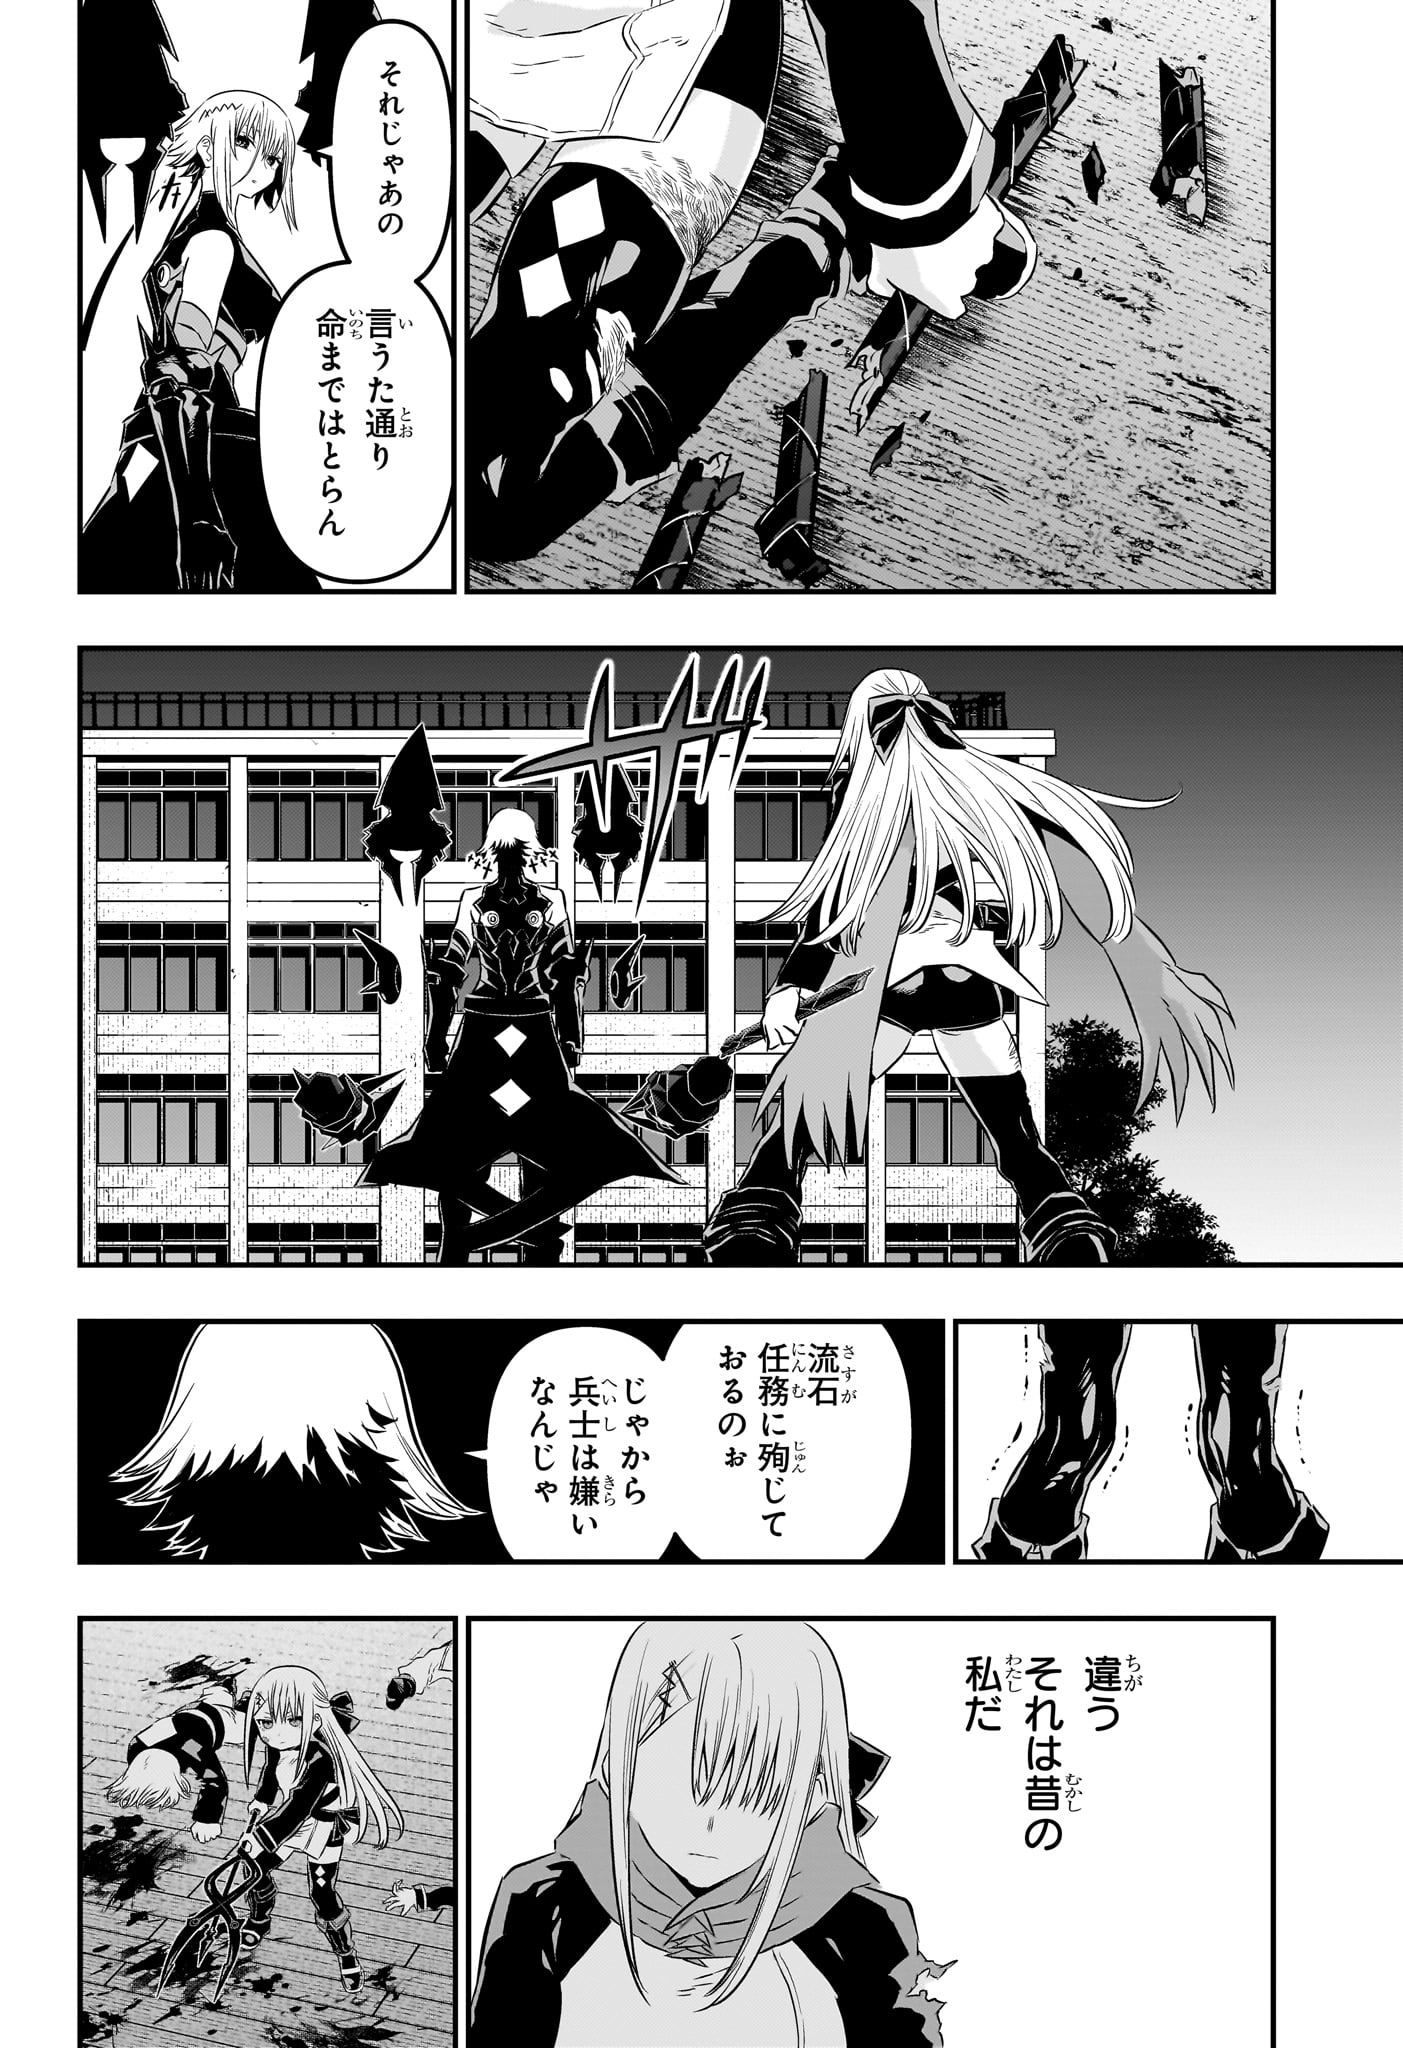 Nue no Onmyouji - Chapter 59 - Page 16